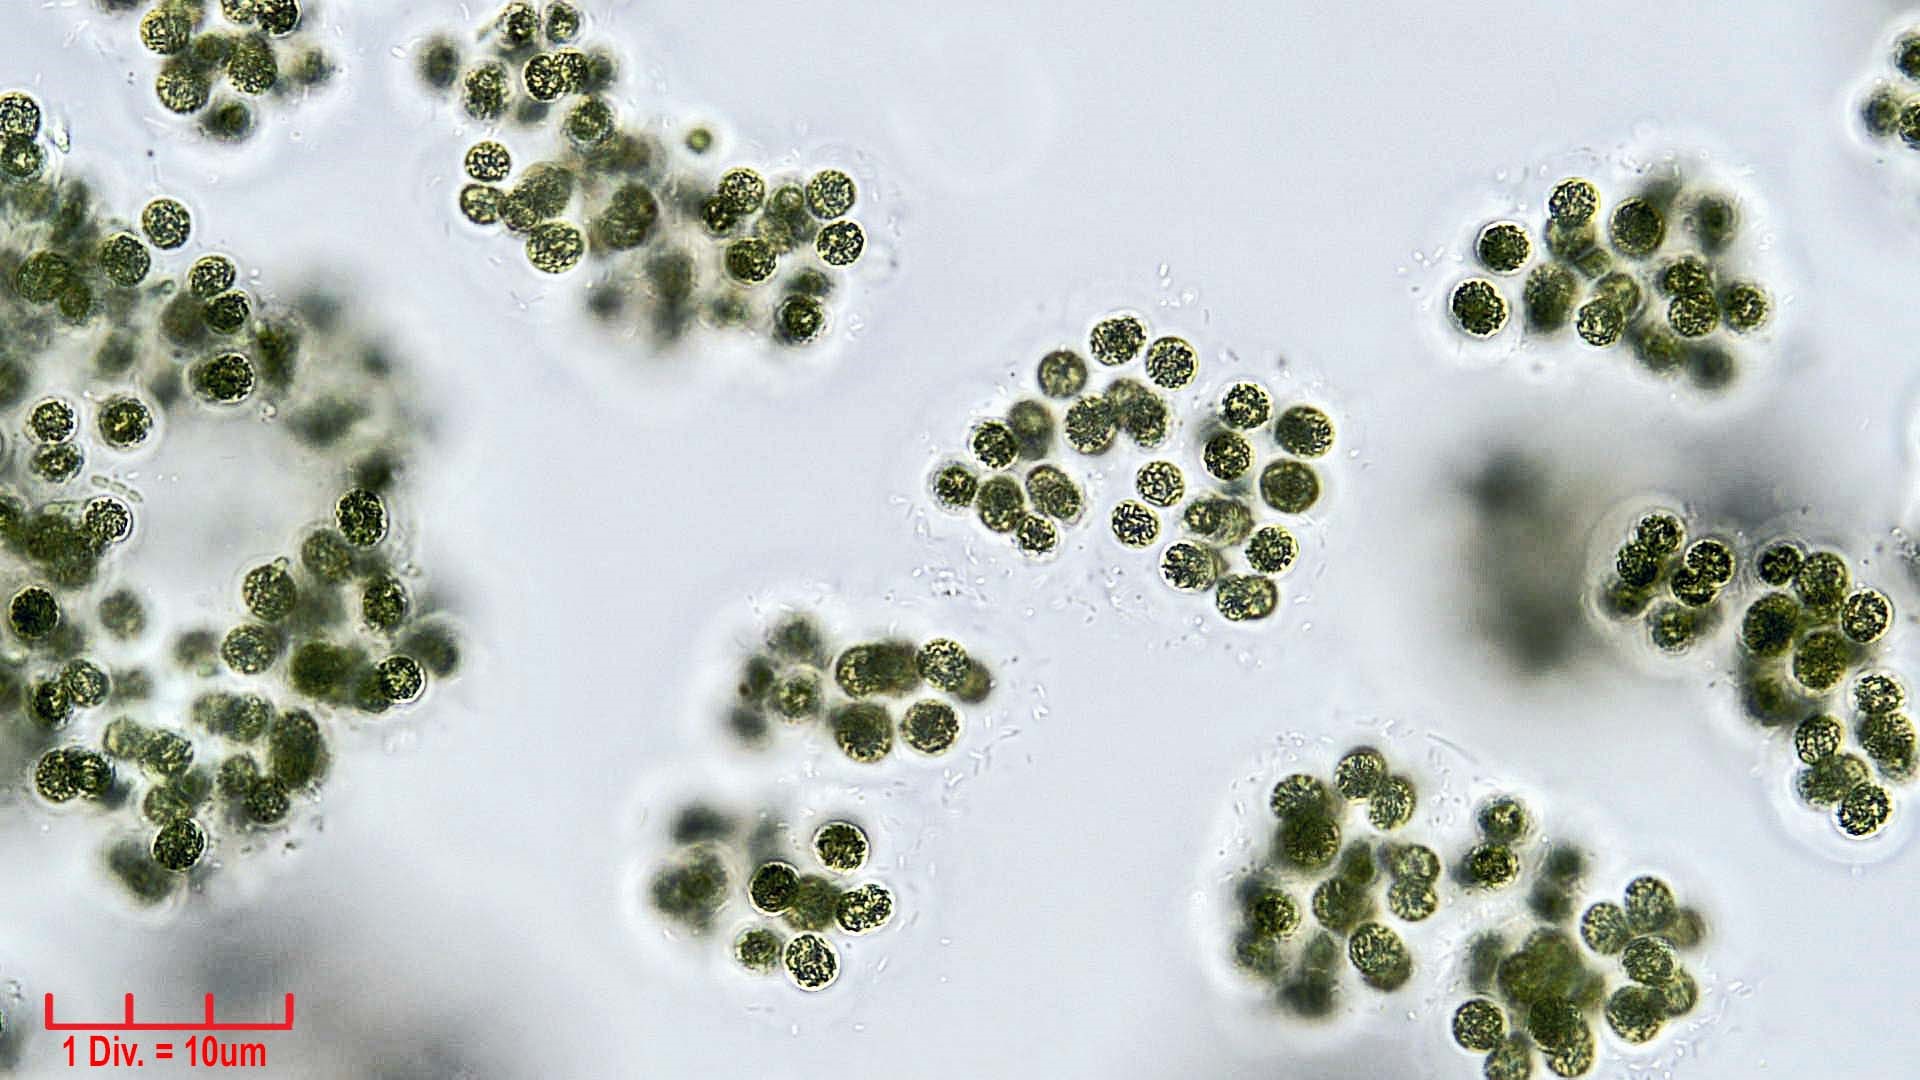 ././Cyanobacteria/Chroococcales/Microcystaceae/Microcystis/viridis/microcystis-viridis-67.jpg